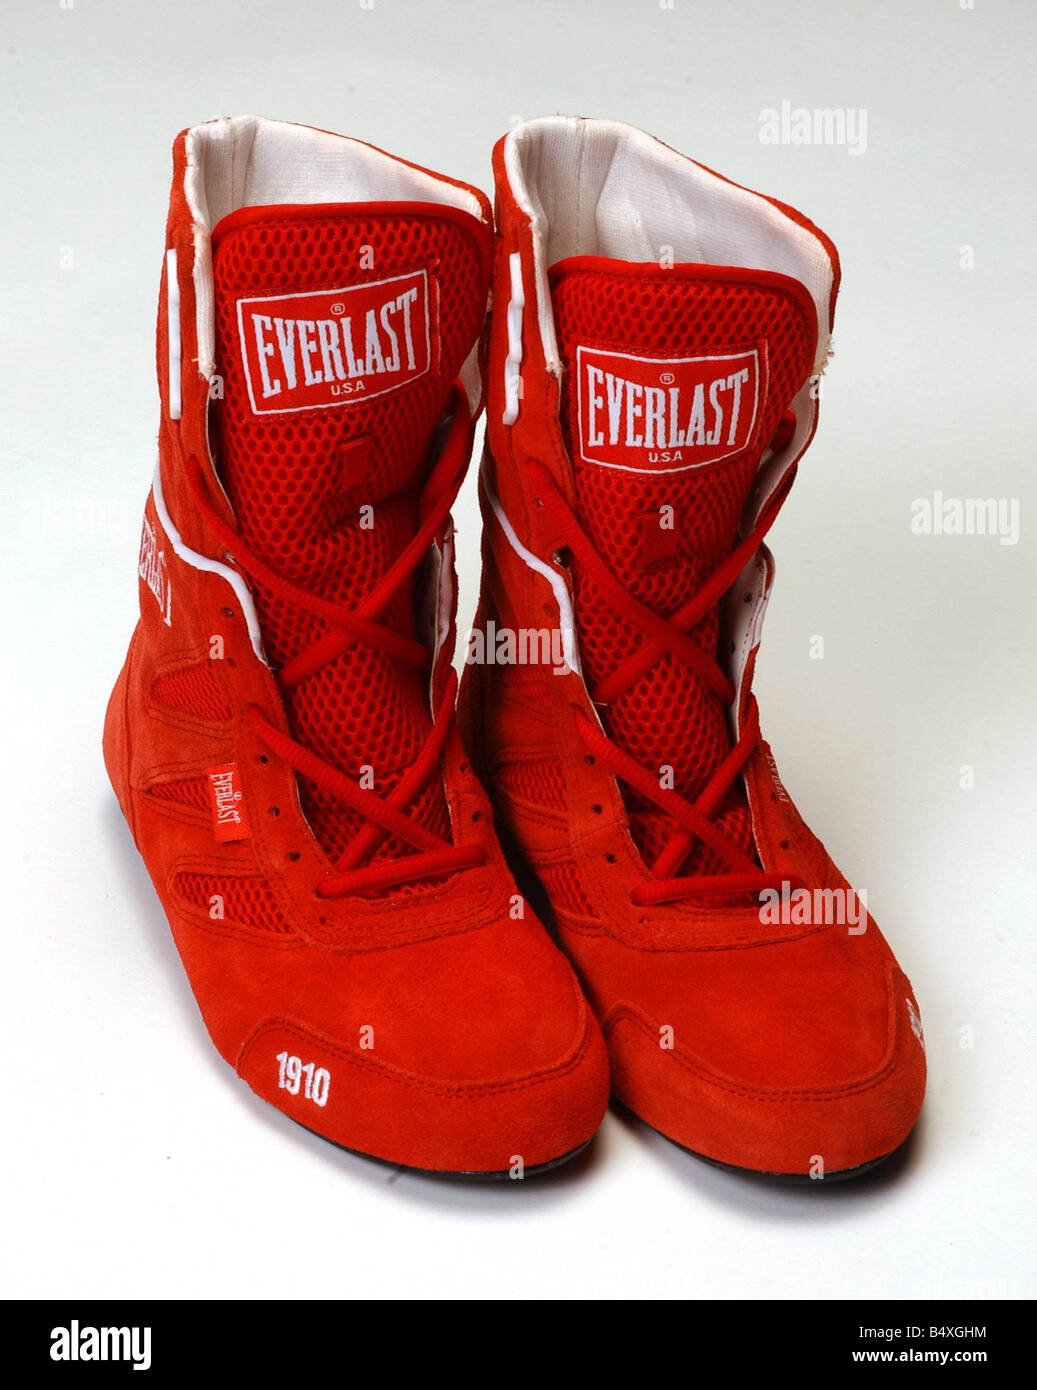 Footwear feature May 2003 Everlast boxing boots Stock Photo - Alamy